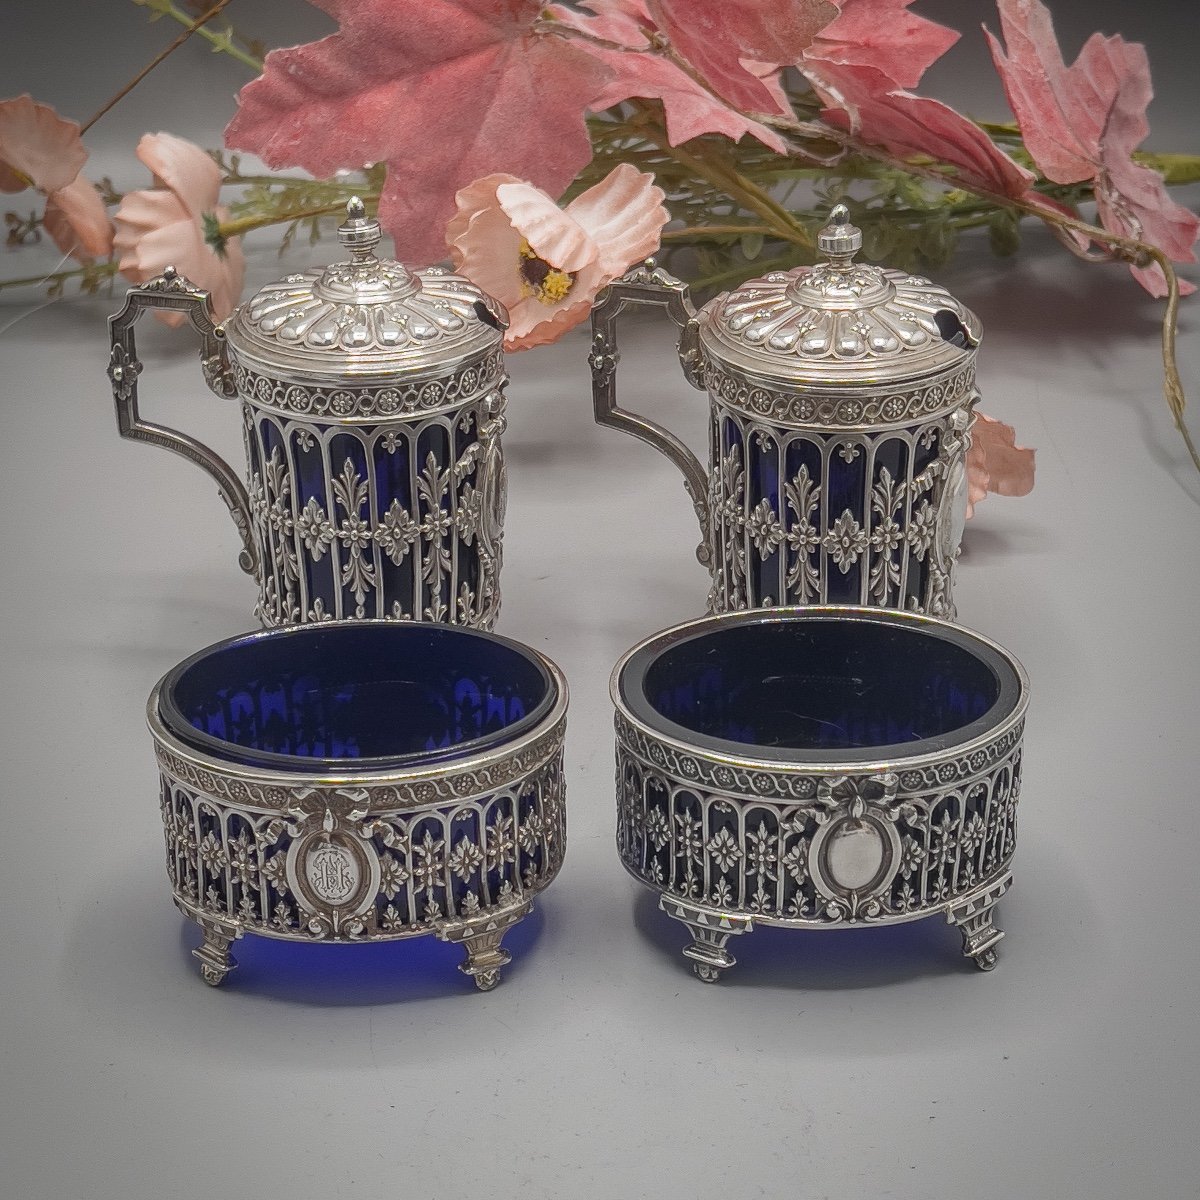 Set Of 2 Mustard Pots And 2 Salters In Crystal And Sterling Silver